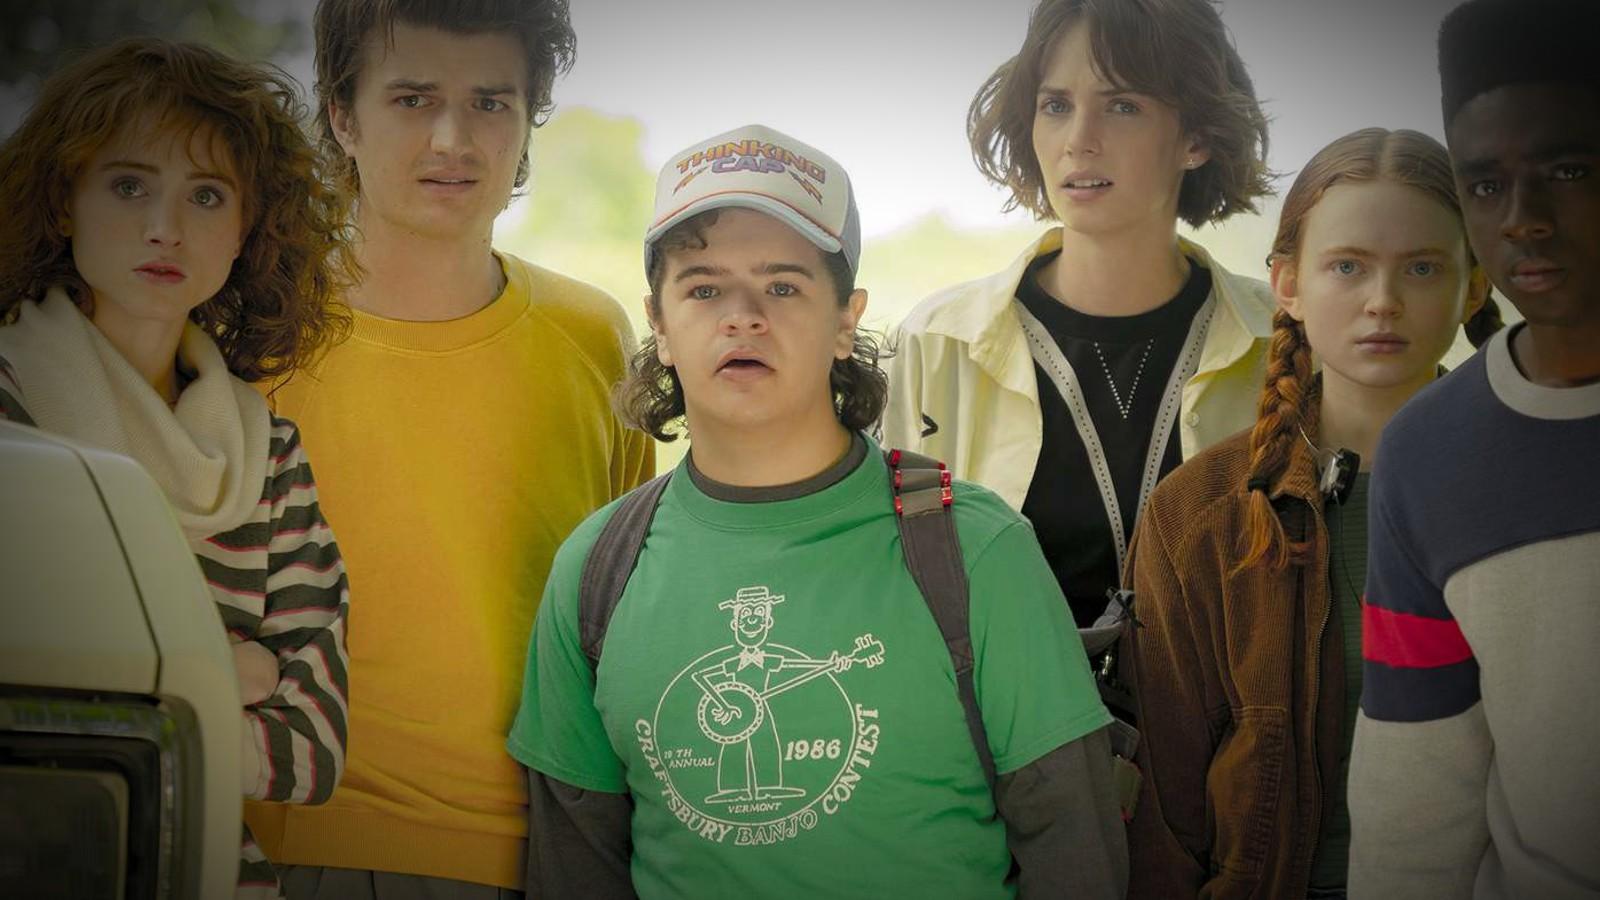 Dustin and the cast of Stranger Things